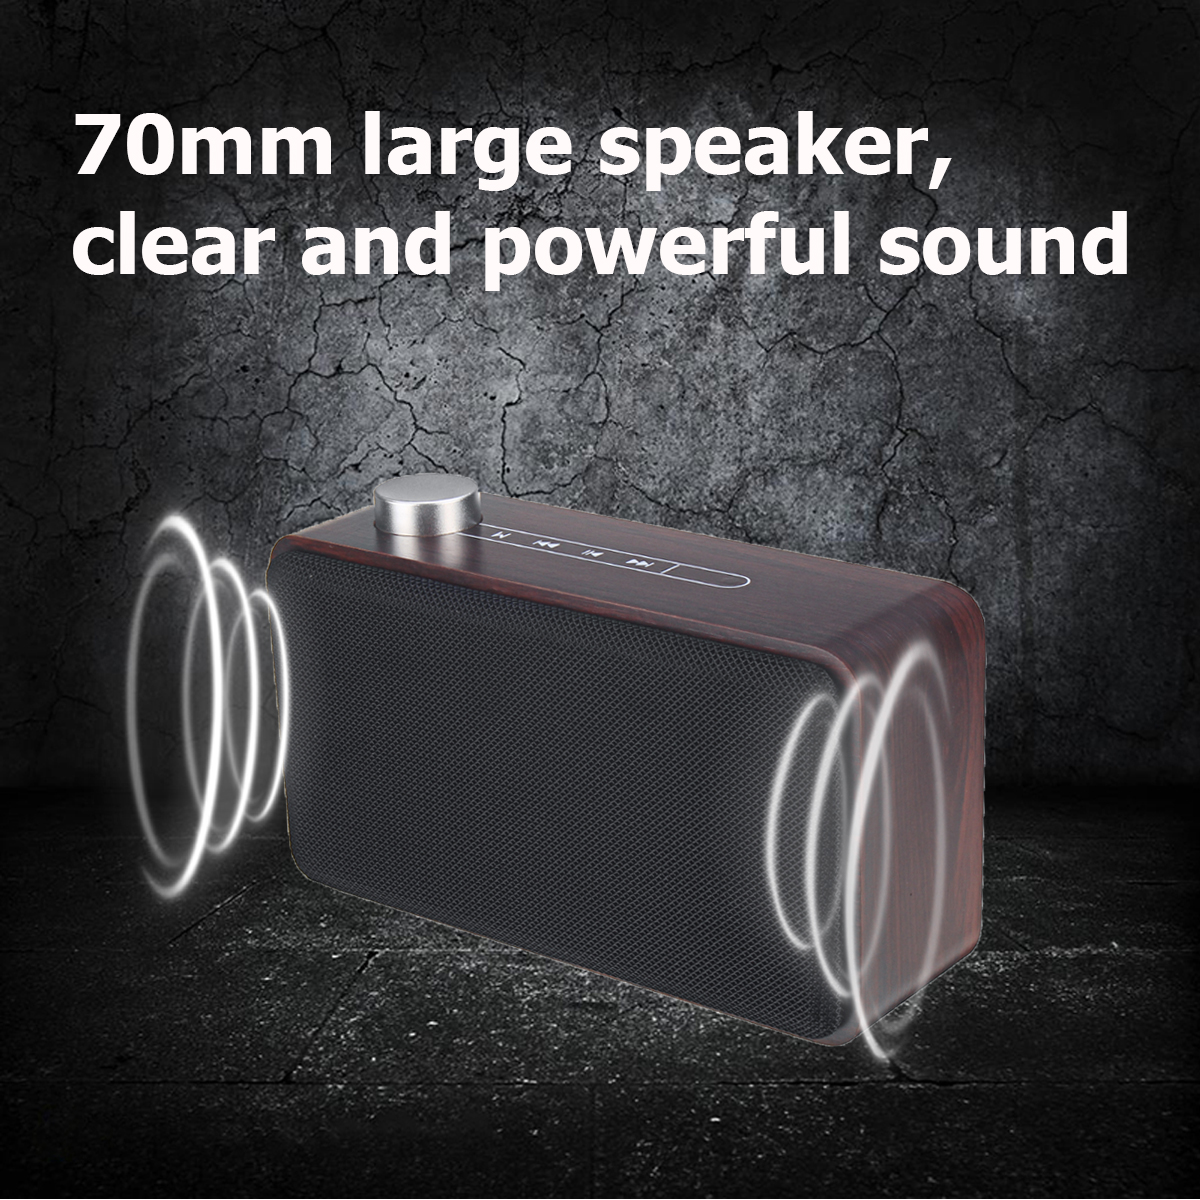 W5A-Wooden-Wireless-bluetooth-Speaker-Portable-Stereo-TF-Card-U-Disk-35mm-Audio-Speaker-with-Mic-1526315-2